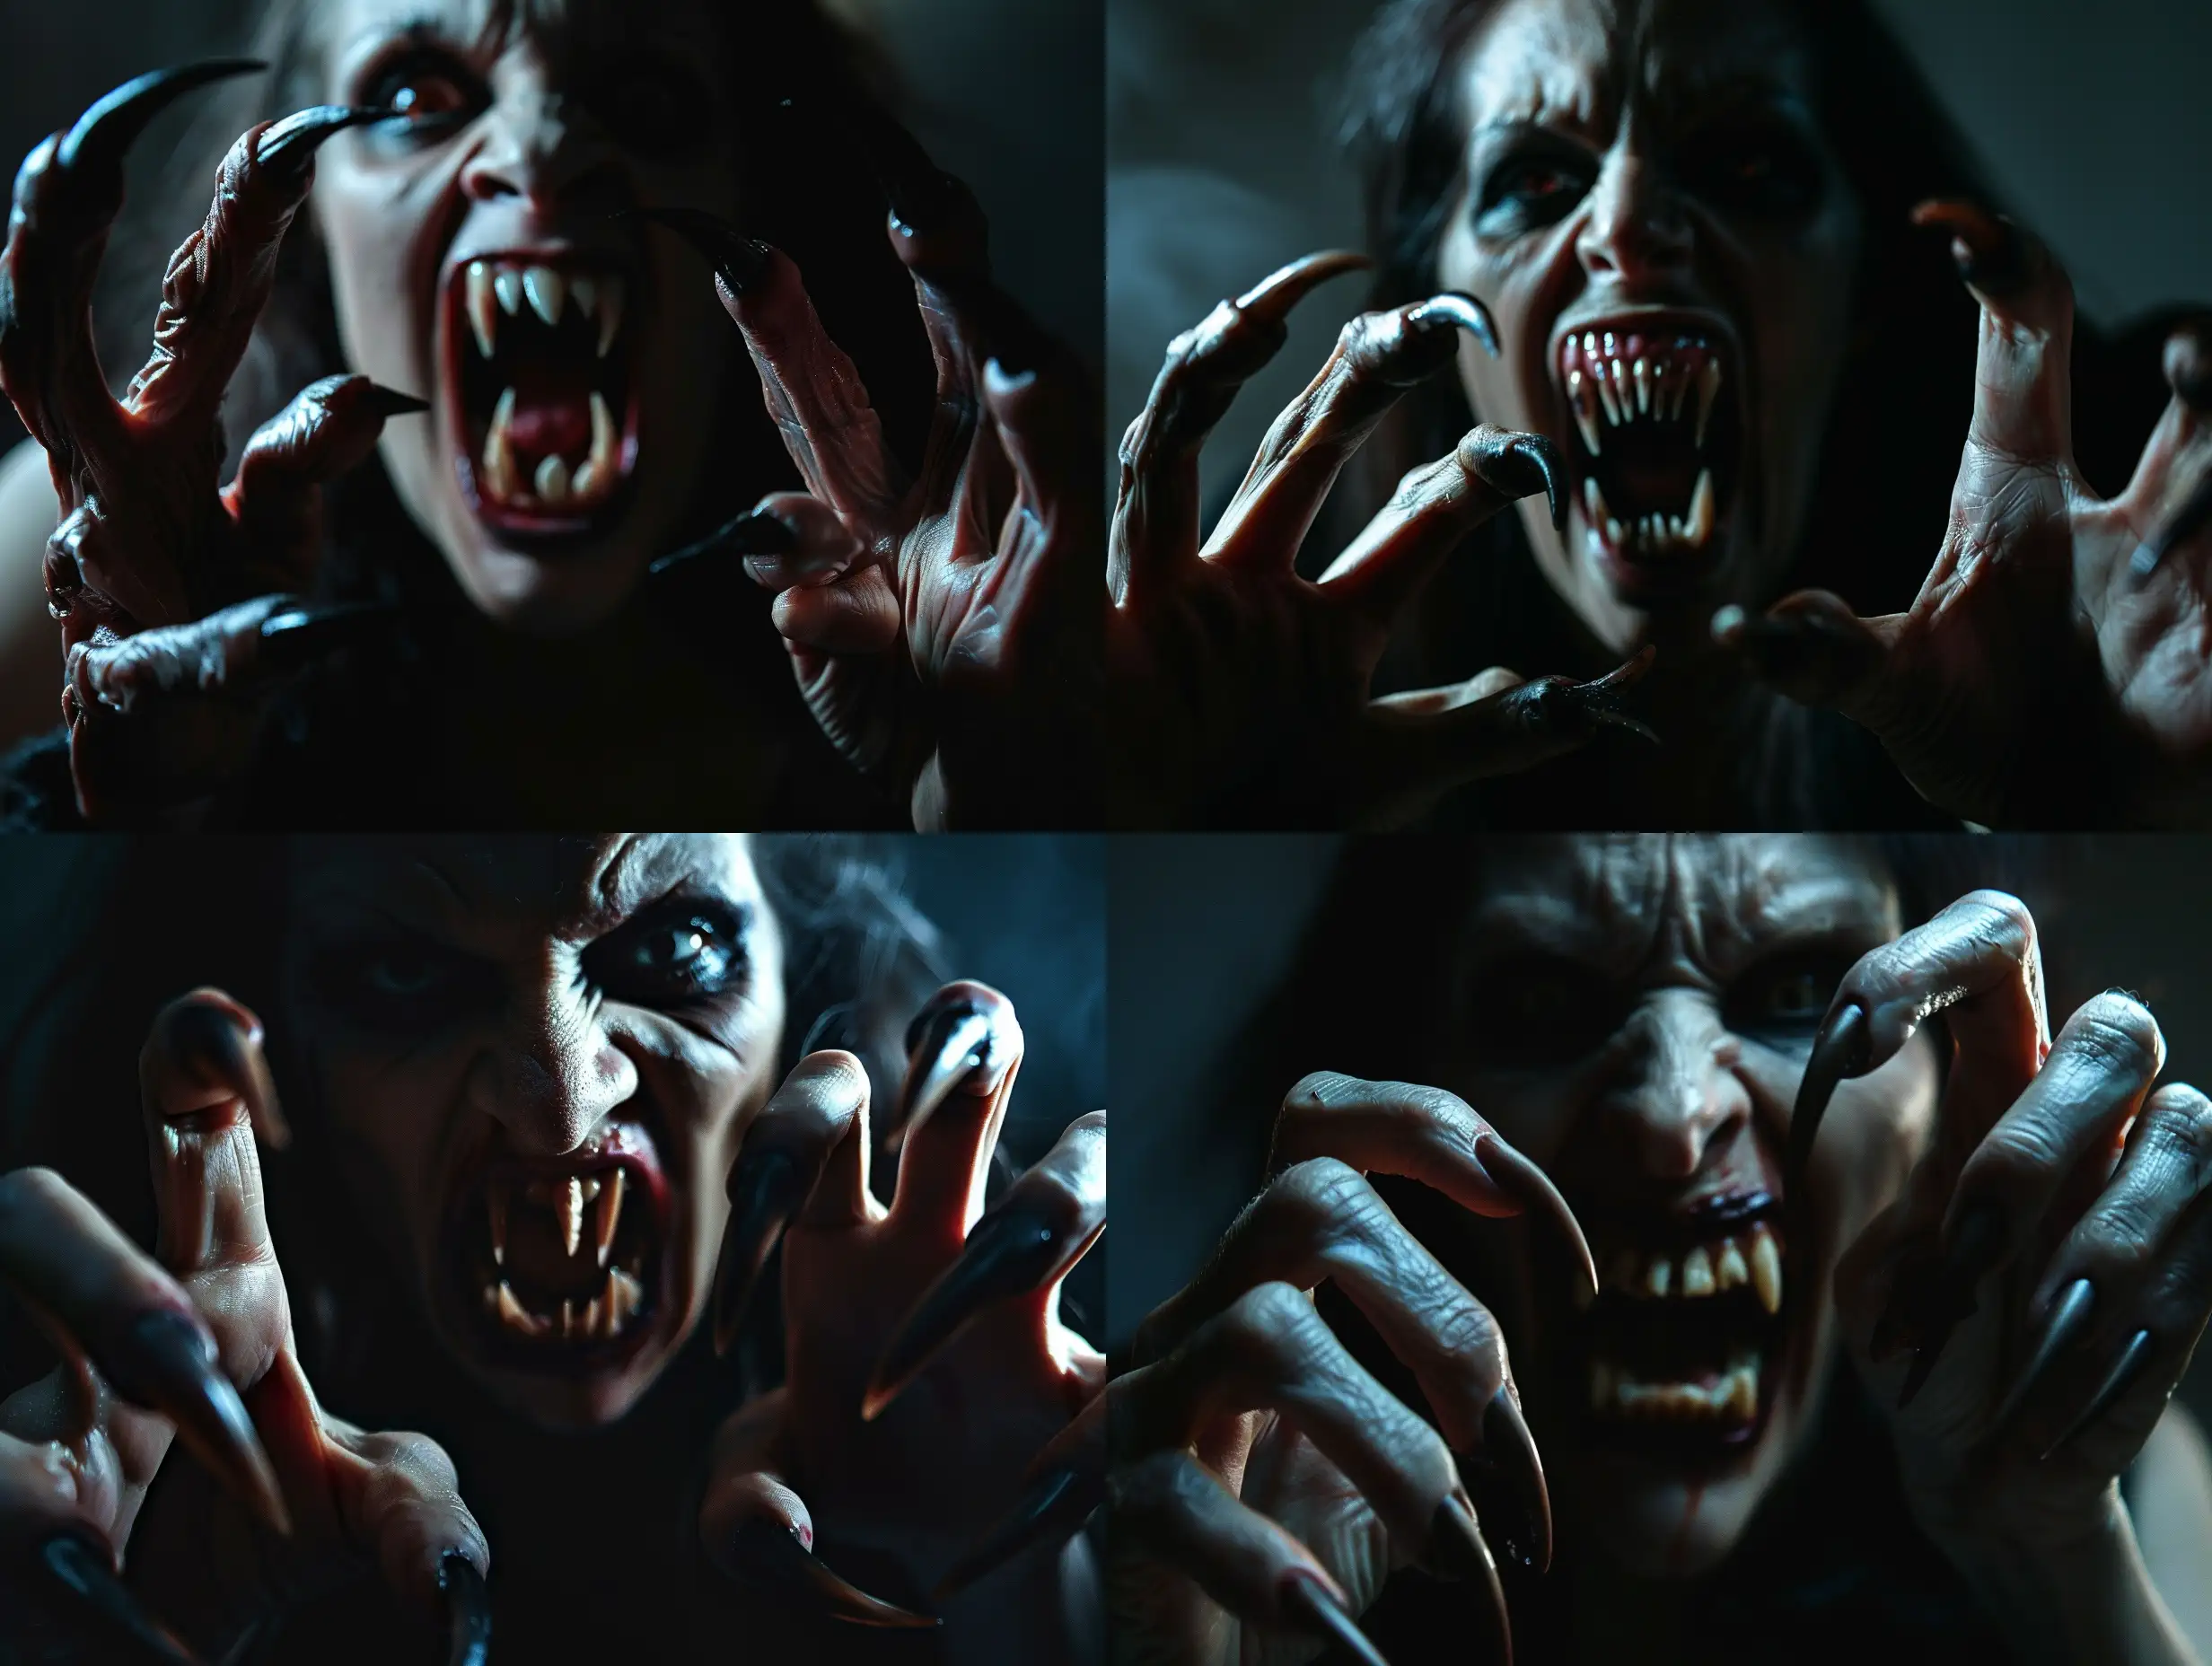 Subject: The main subject of the image is a wild and ugly vampire woman, depicted in a photorealistic style. She has extra long pointed fingernails resembling claws, and her mouth is open with fang-like teeth, giving her a threatening appearance.
Setting: The scene is set inside a dark room, adding to the eerie atmosphere. The darkness enhances the horror element and creates a cinematic feel.
Style/Coloring: The image is hyper-realistic with high detail and photo detailing, contributing to the photorealistic quality. The coloring is dark and haunting, with atmospheric lighting intensifying the creepy vibe.
Action/Items: The vampire woman appears to have just emerged from the darkness, adding a sense of suspense and fear. Her posture and expression convey aggression and terror.
Costume/Appearance: The vampire's appearance is grotesque and terrifying, with detailed nails and realistic anatomy, including five fingers on each hand. Her undead look suggests that she has climbed out of a grave.
Accessories: The vampire's only accessories are her long, pointed fingernails, which resemble the claws of a predator, enhancing her menacing appearance.